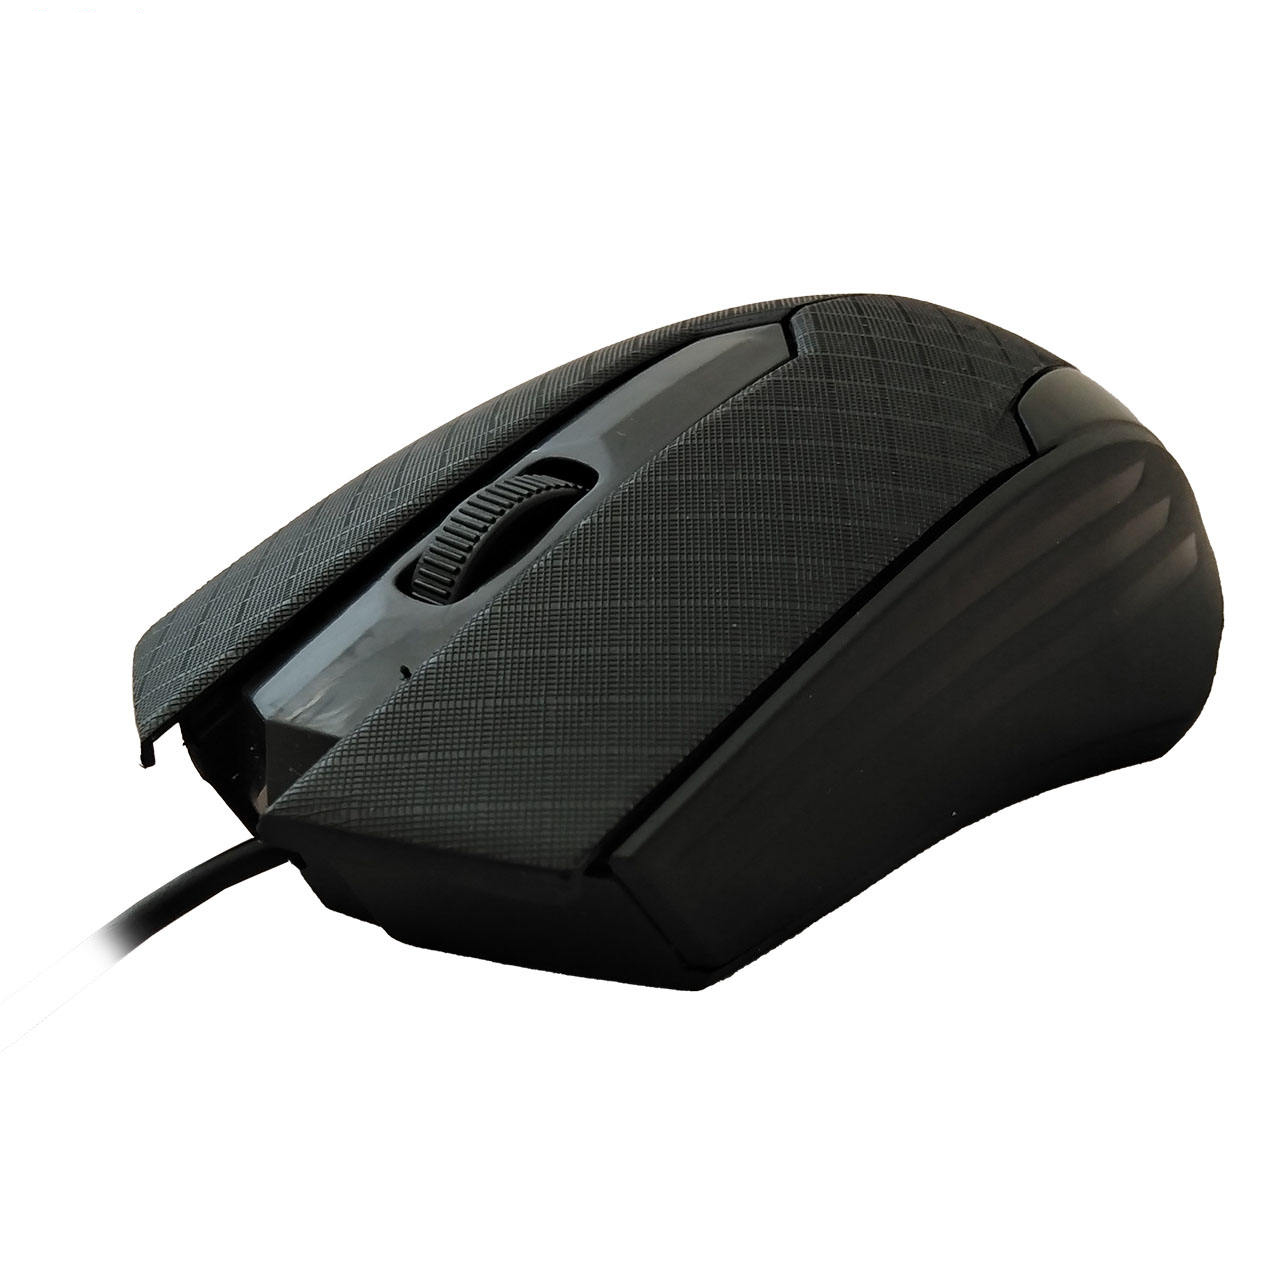 ENZO E600 Wired Optical Mouse%20(4)